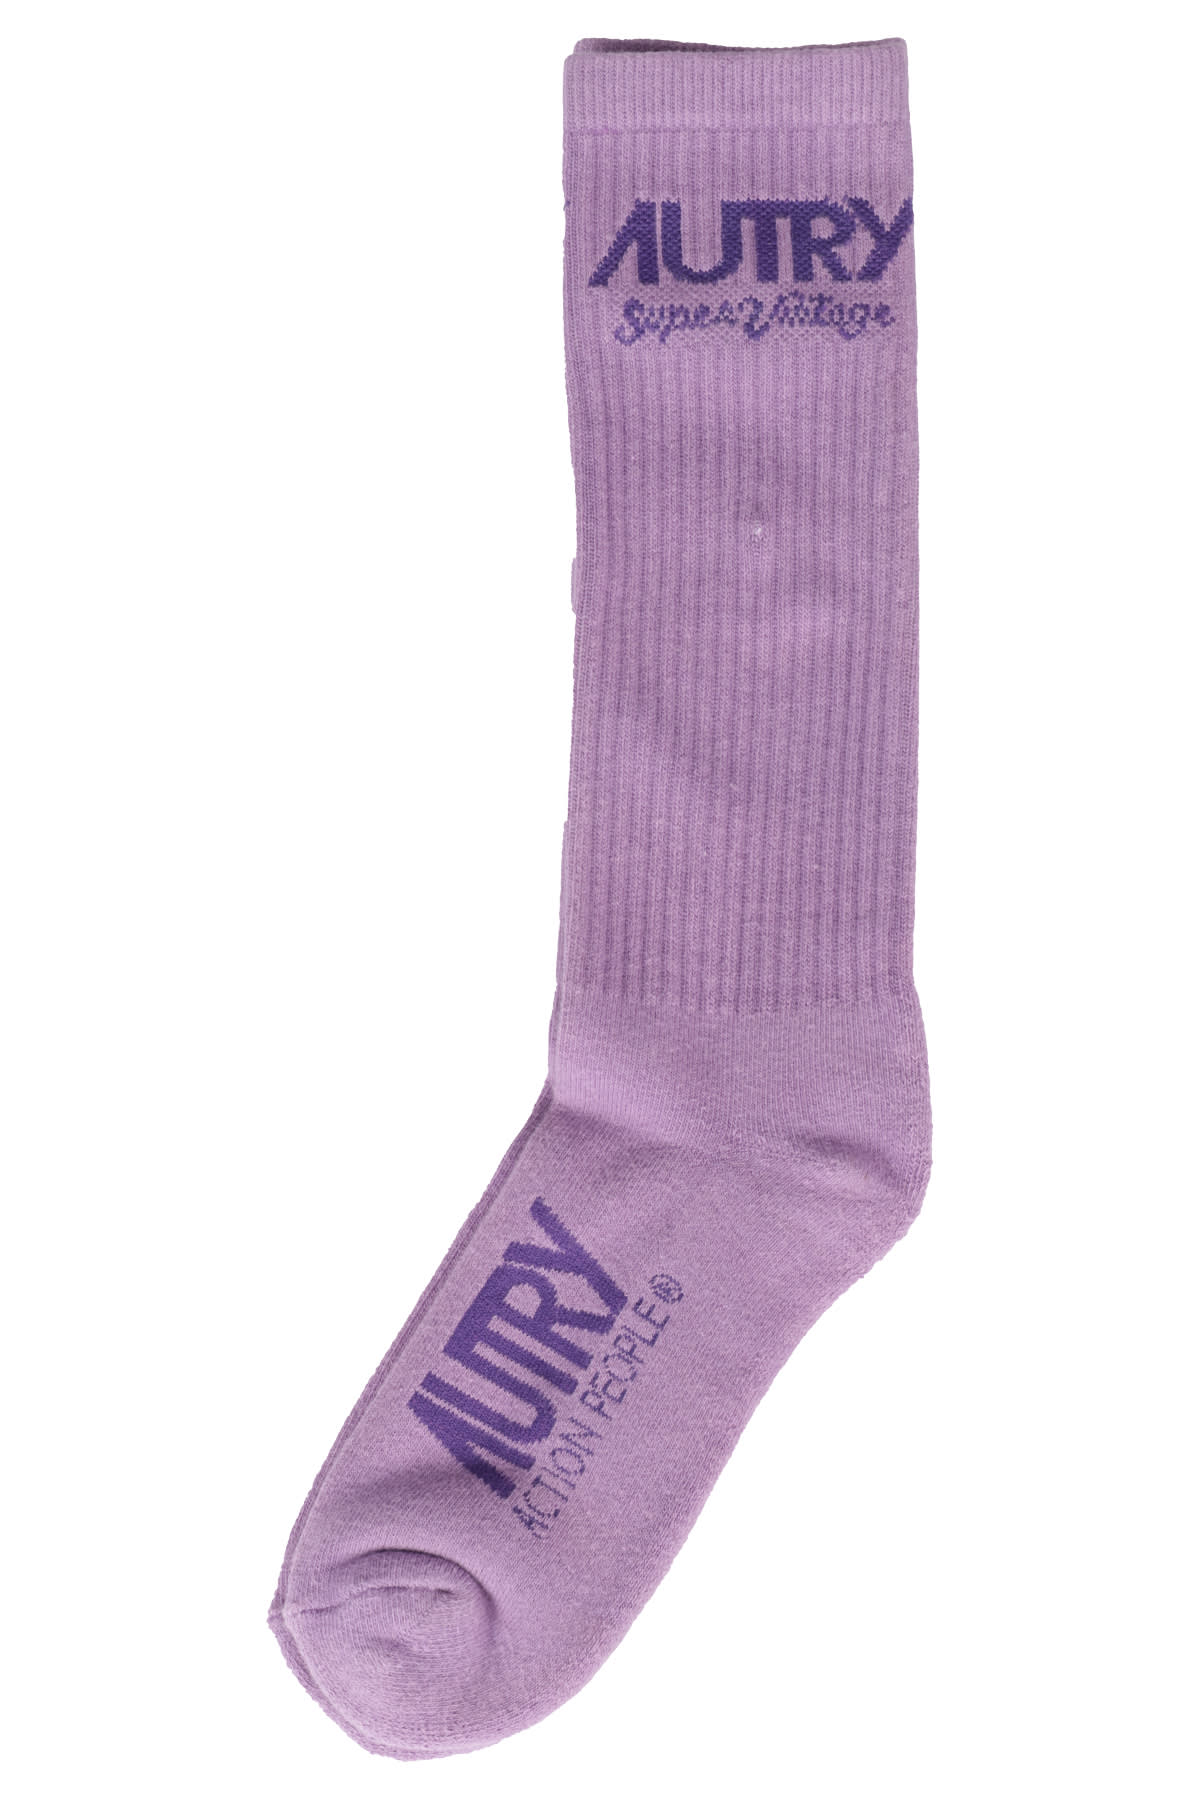 Autry Socks In Tinto Lilac